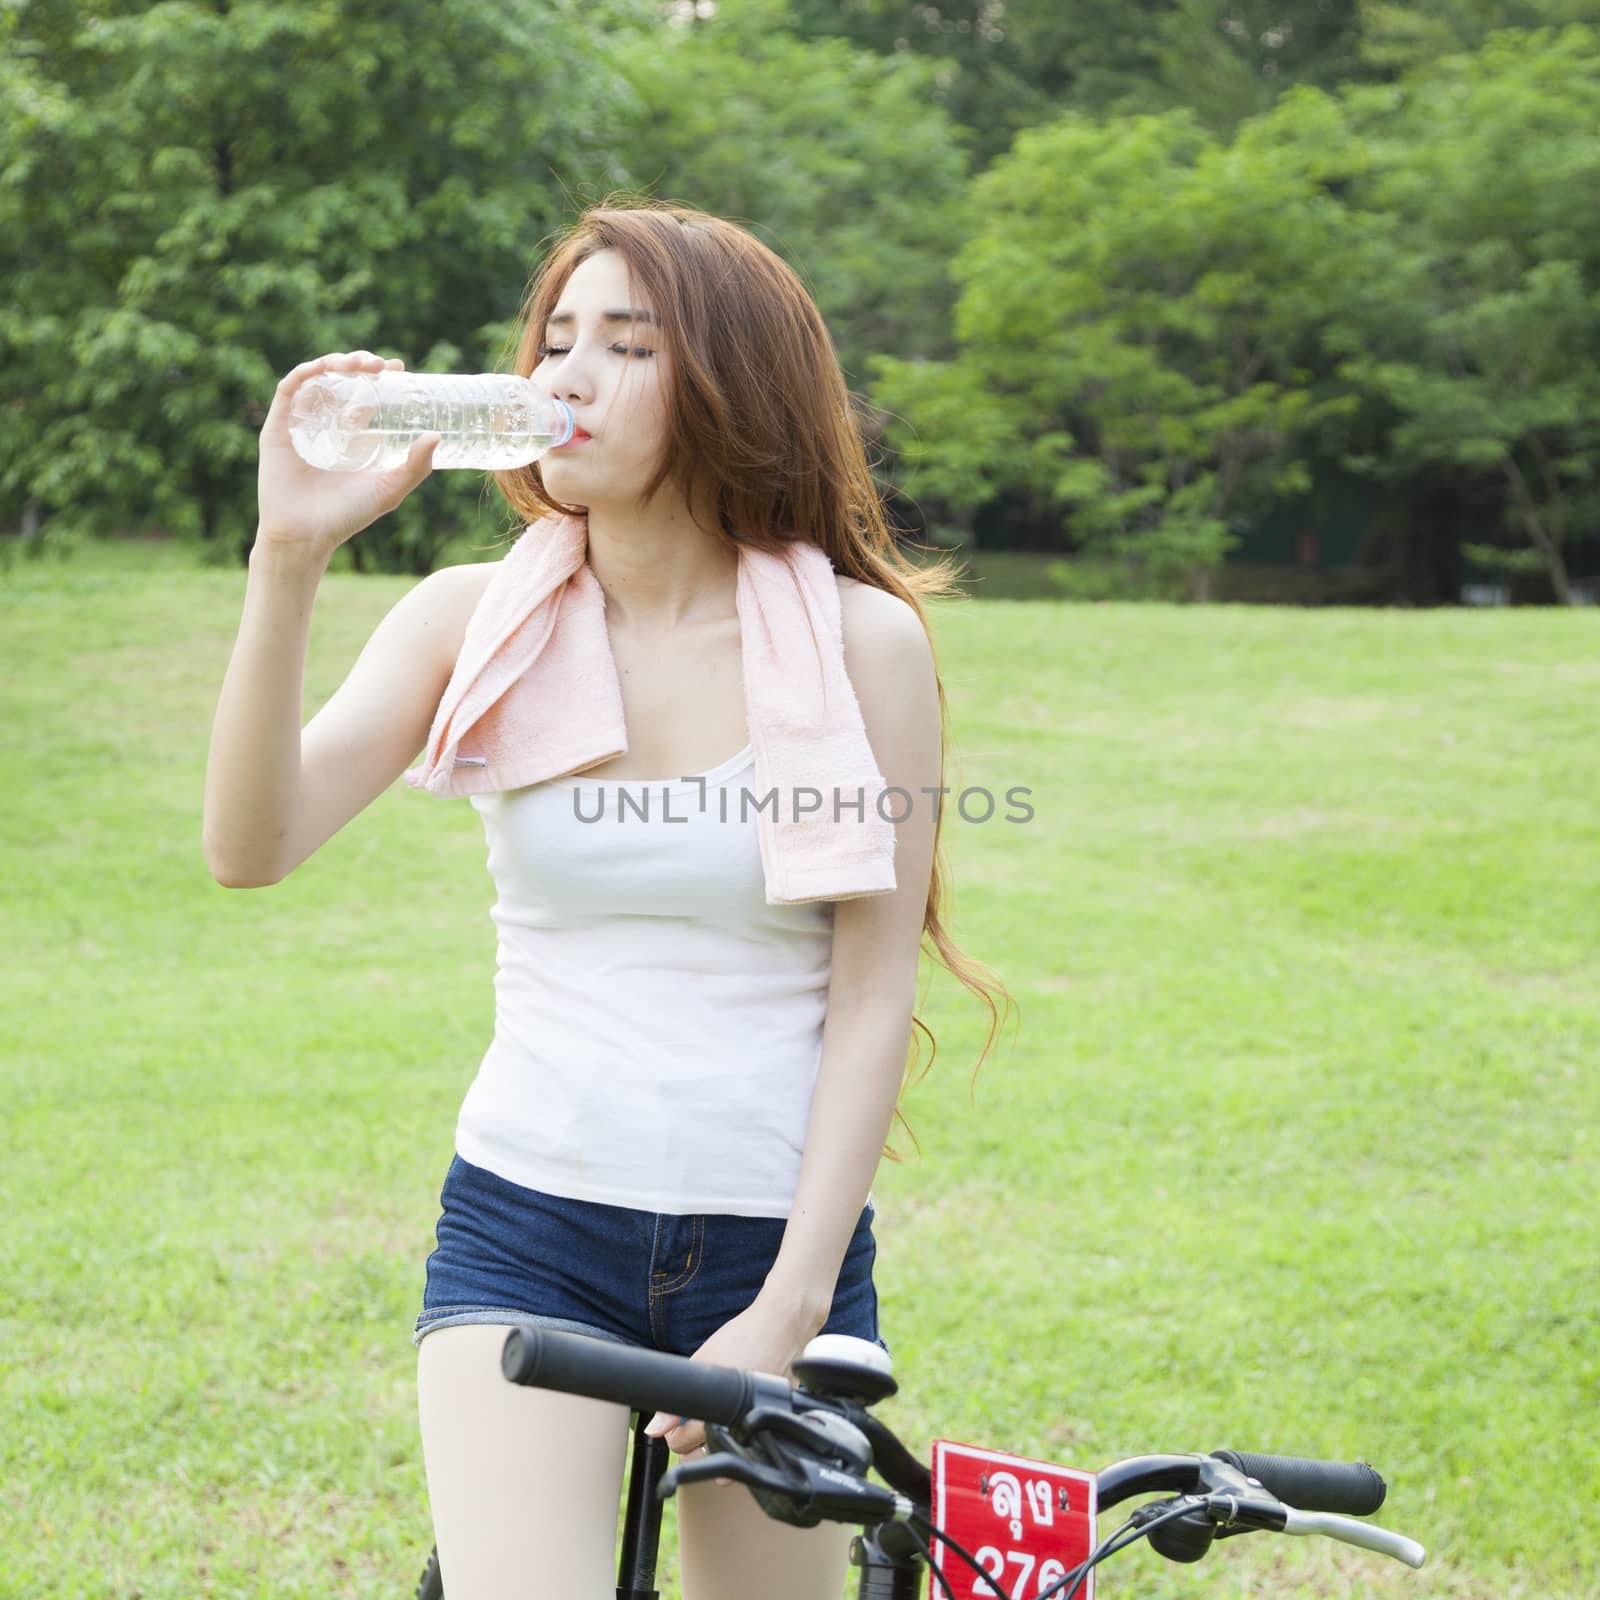 Woman drinking water. Bike ride on grass in the park.